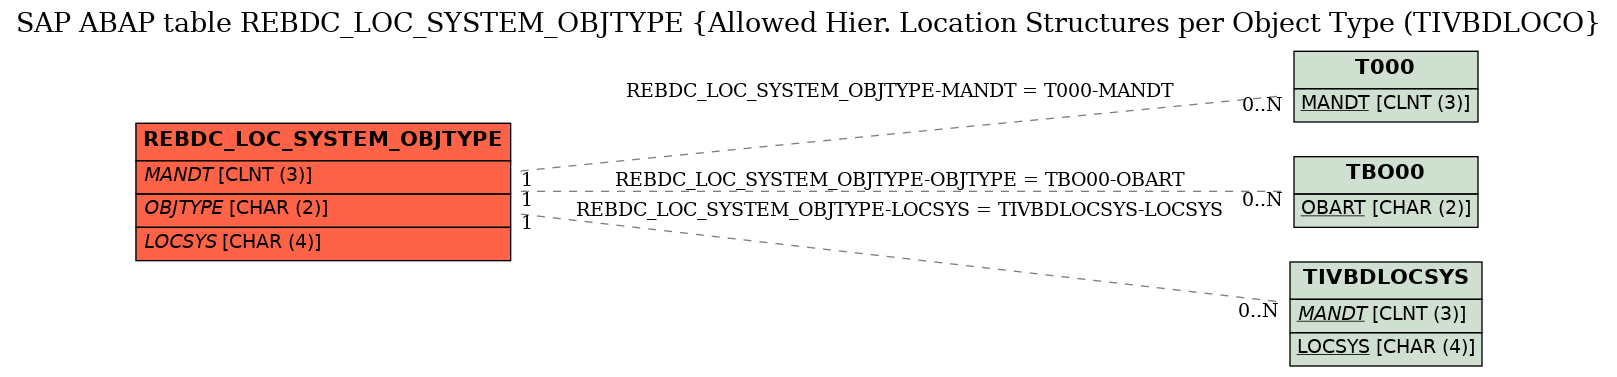 E-R Diagram for table REBDC_LOC_SYSTEM_OBJTYPE (Allowed Hier. Location Structures per Object Type (TIVBDLOCO)